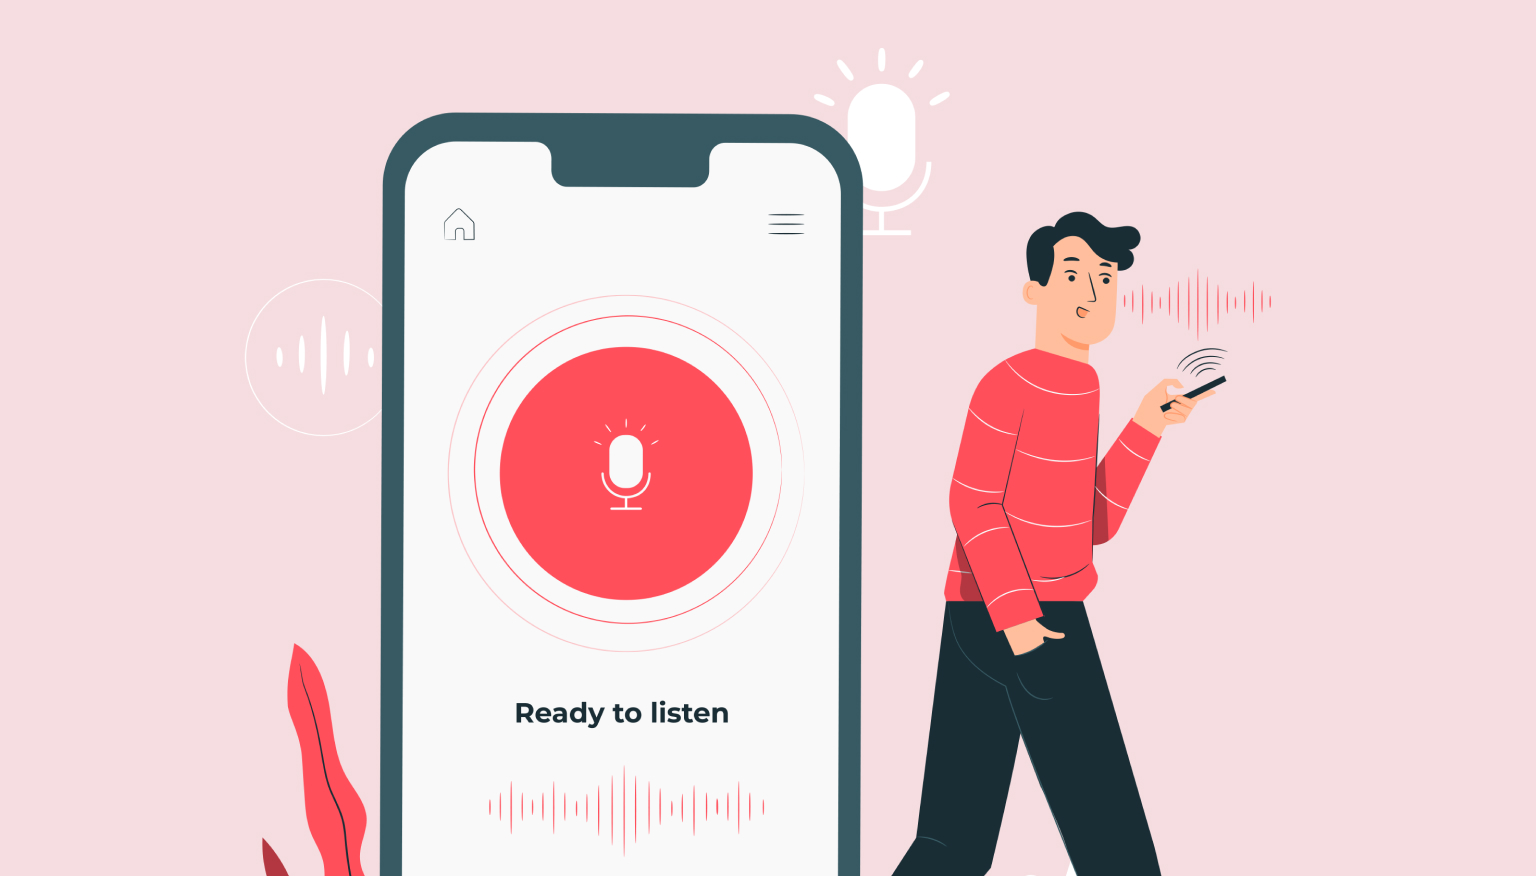 Website optimization for voice search - is it necessary or not?